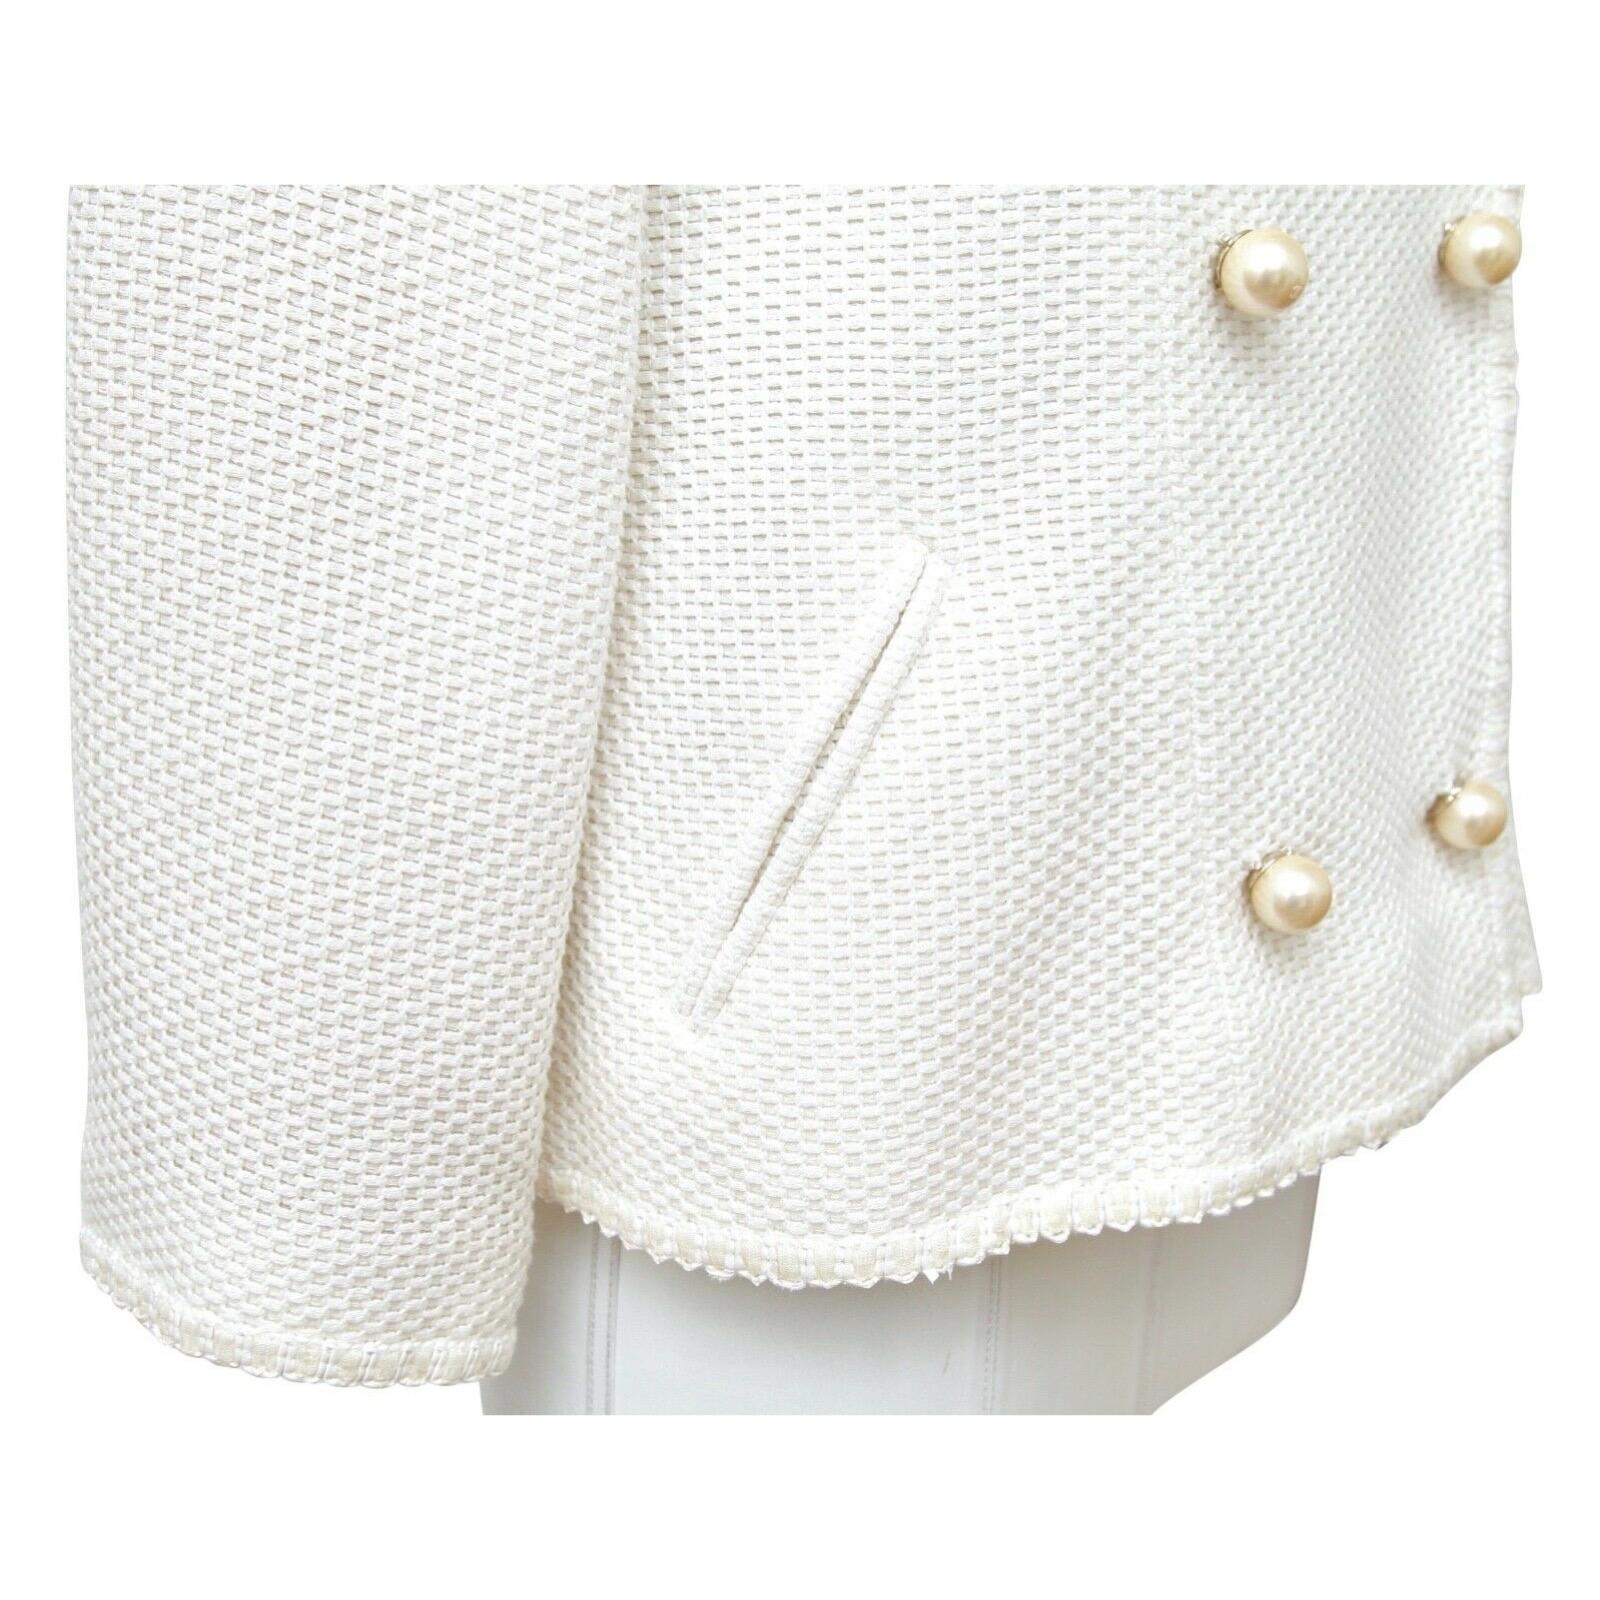 CHANEL Tweed Jacket Coat White Pearl 3/4 Sleeve Double Breasted 2013 13S Sz 34 In Good Condition For Sale In Hollywood, FL